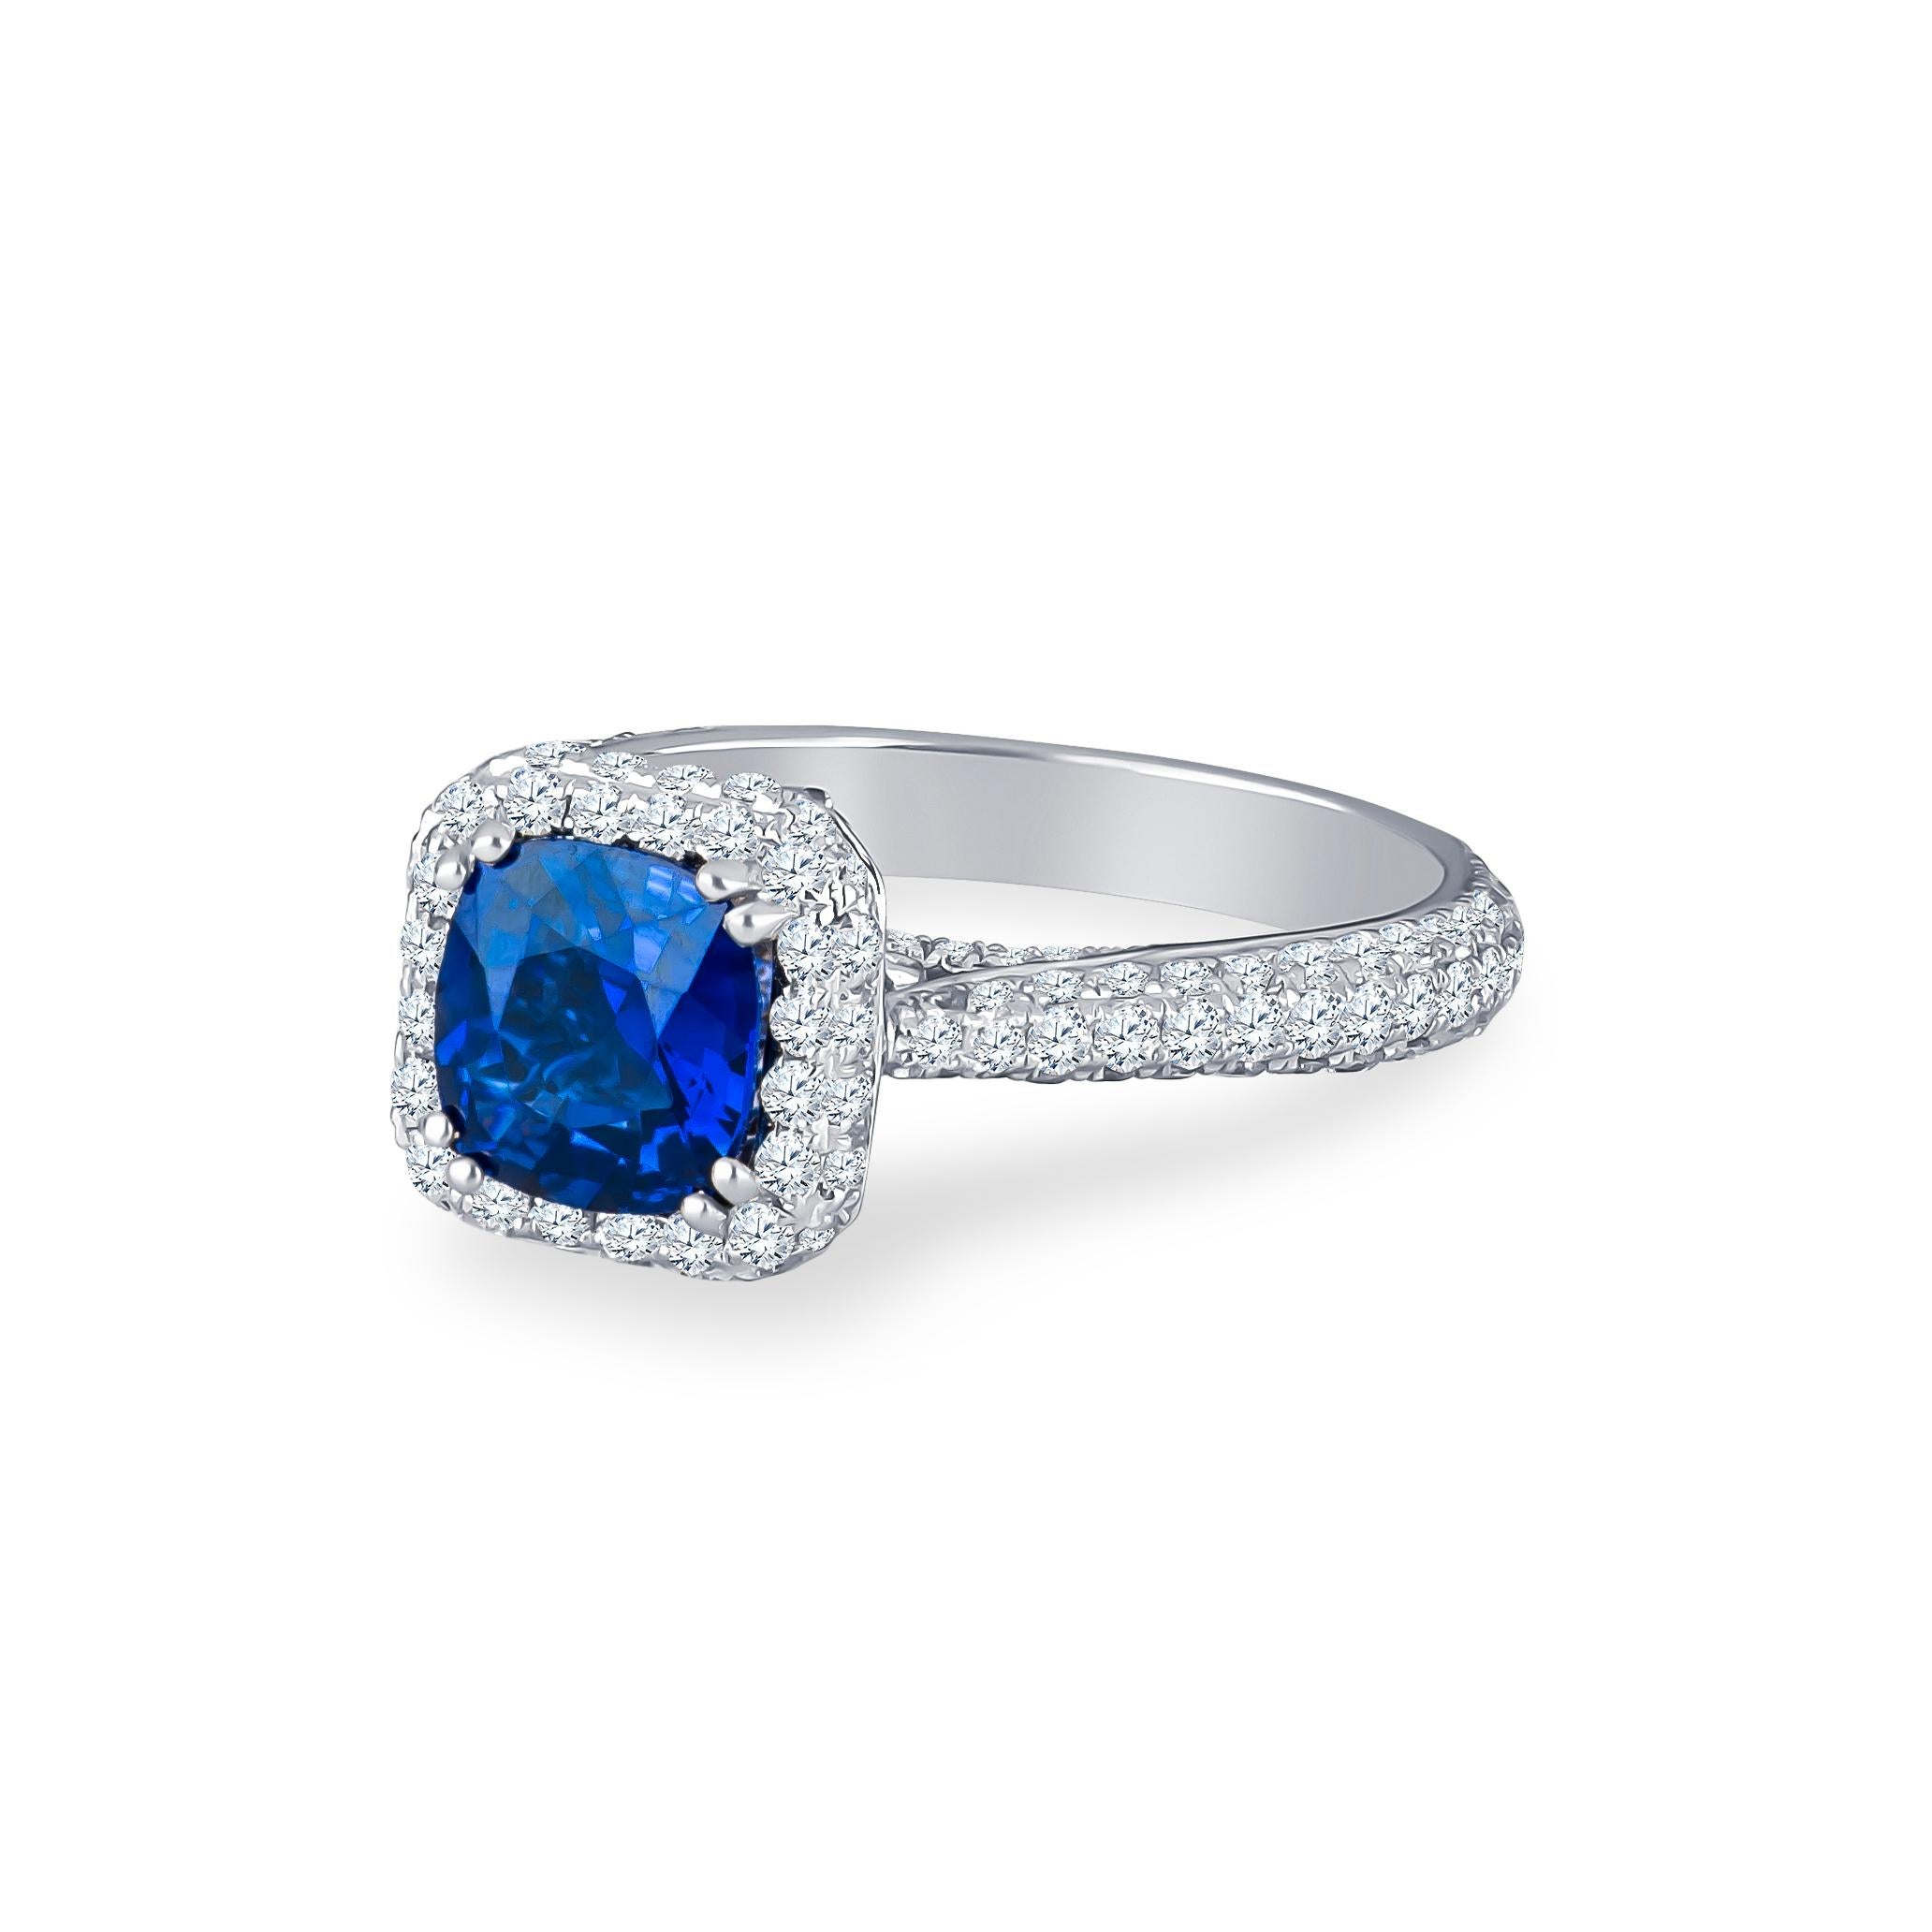 1.74 Carat cushion cut very fine royal blue Ceylon sapphire (GIA report) with 1.30 carats total in micropave round brilliant diamonds. Set in an 18 Karat white gold, diamond halo ring. Ring size 7, size is adjustable to larger or smaller upon